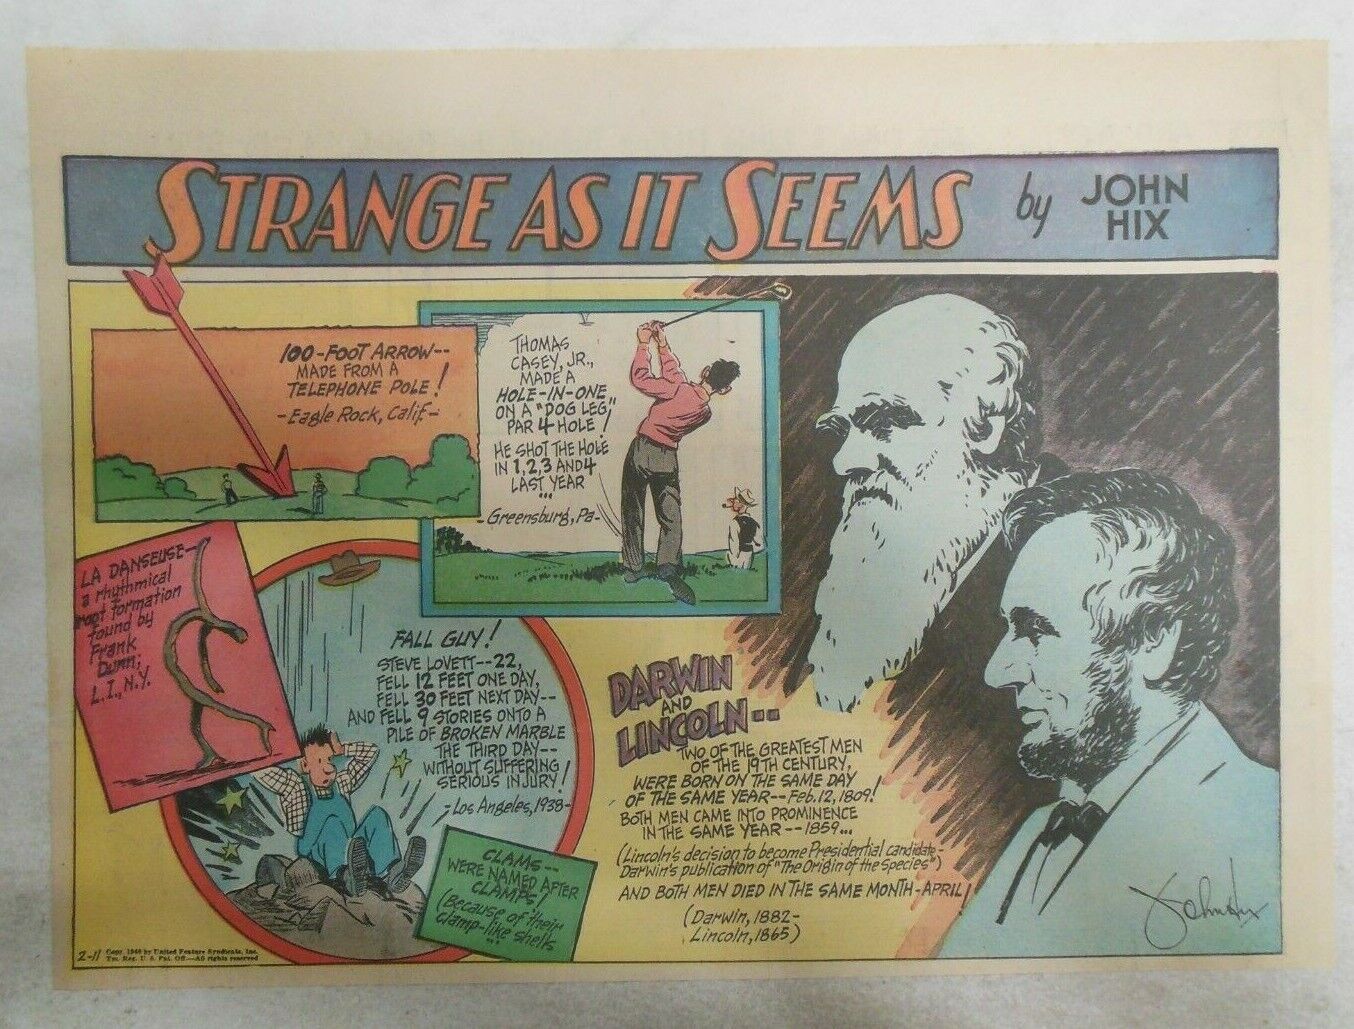 Strange As It Seems: Charles Darwin and Abraham Lincoln by Hix from 2/11/1940